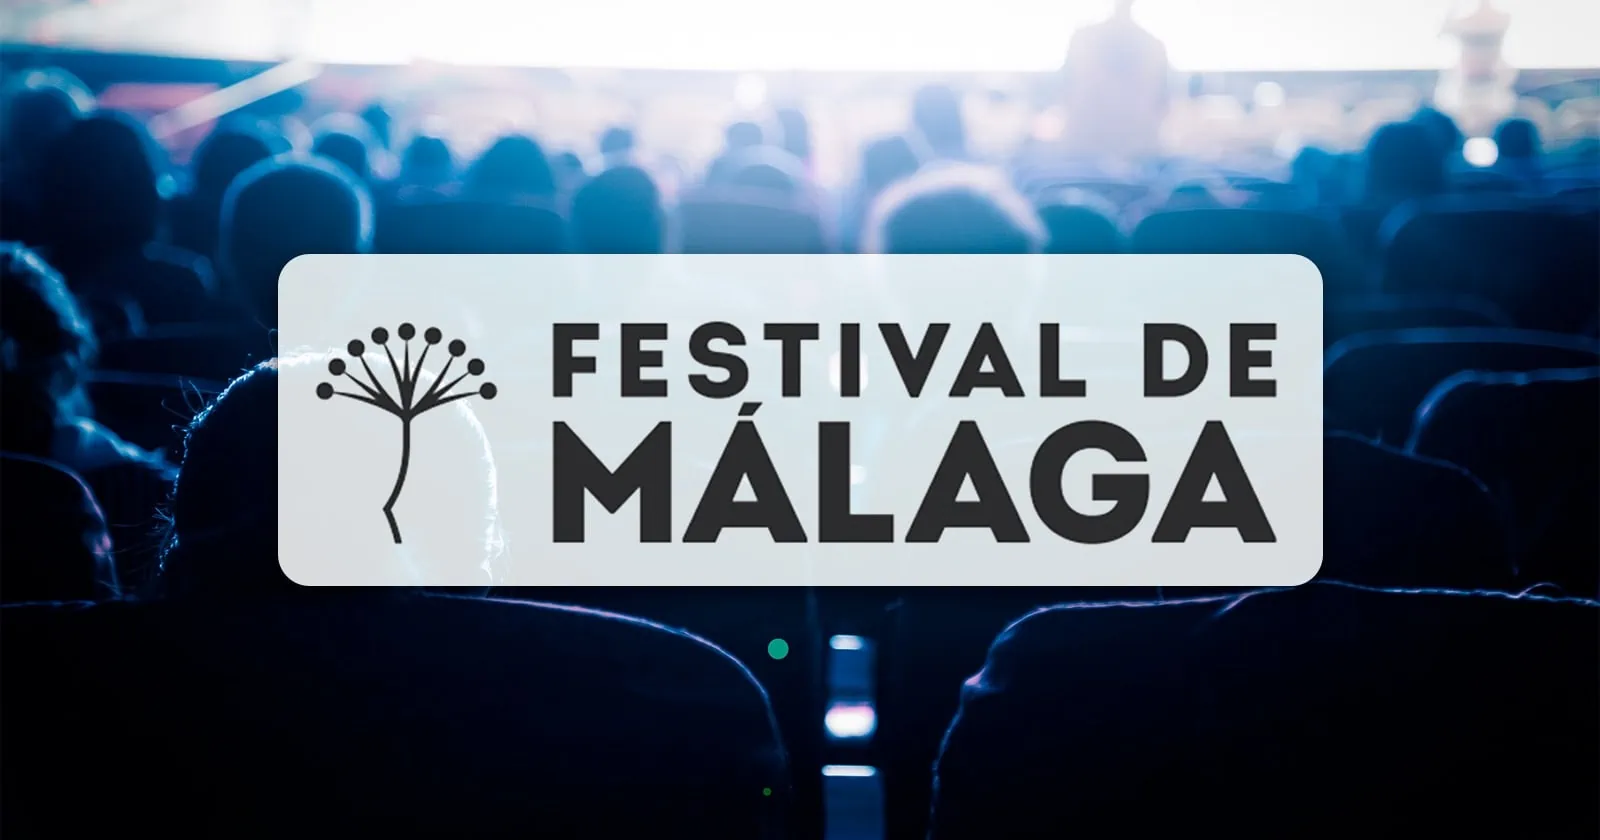 This Cuban Movie Competes in the 27th Málaga Festival